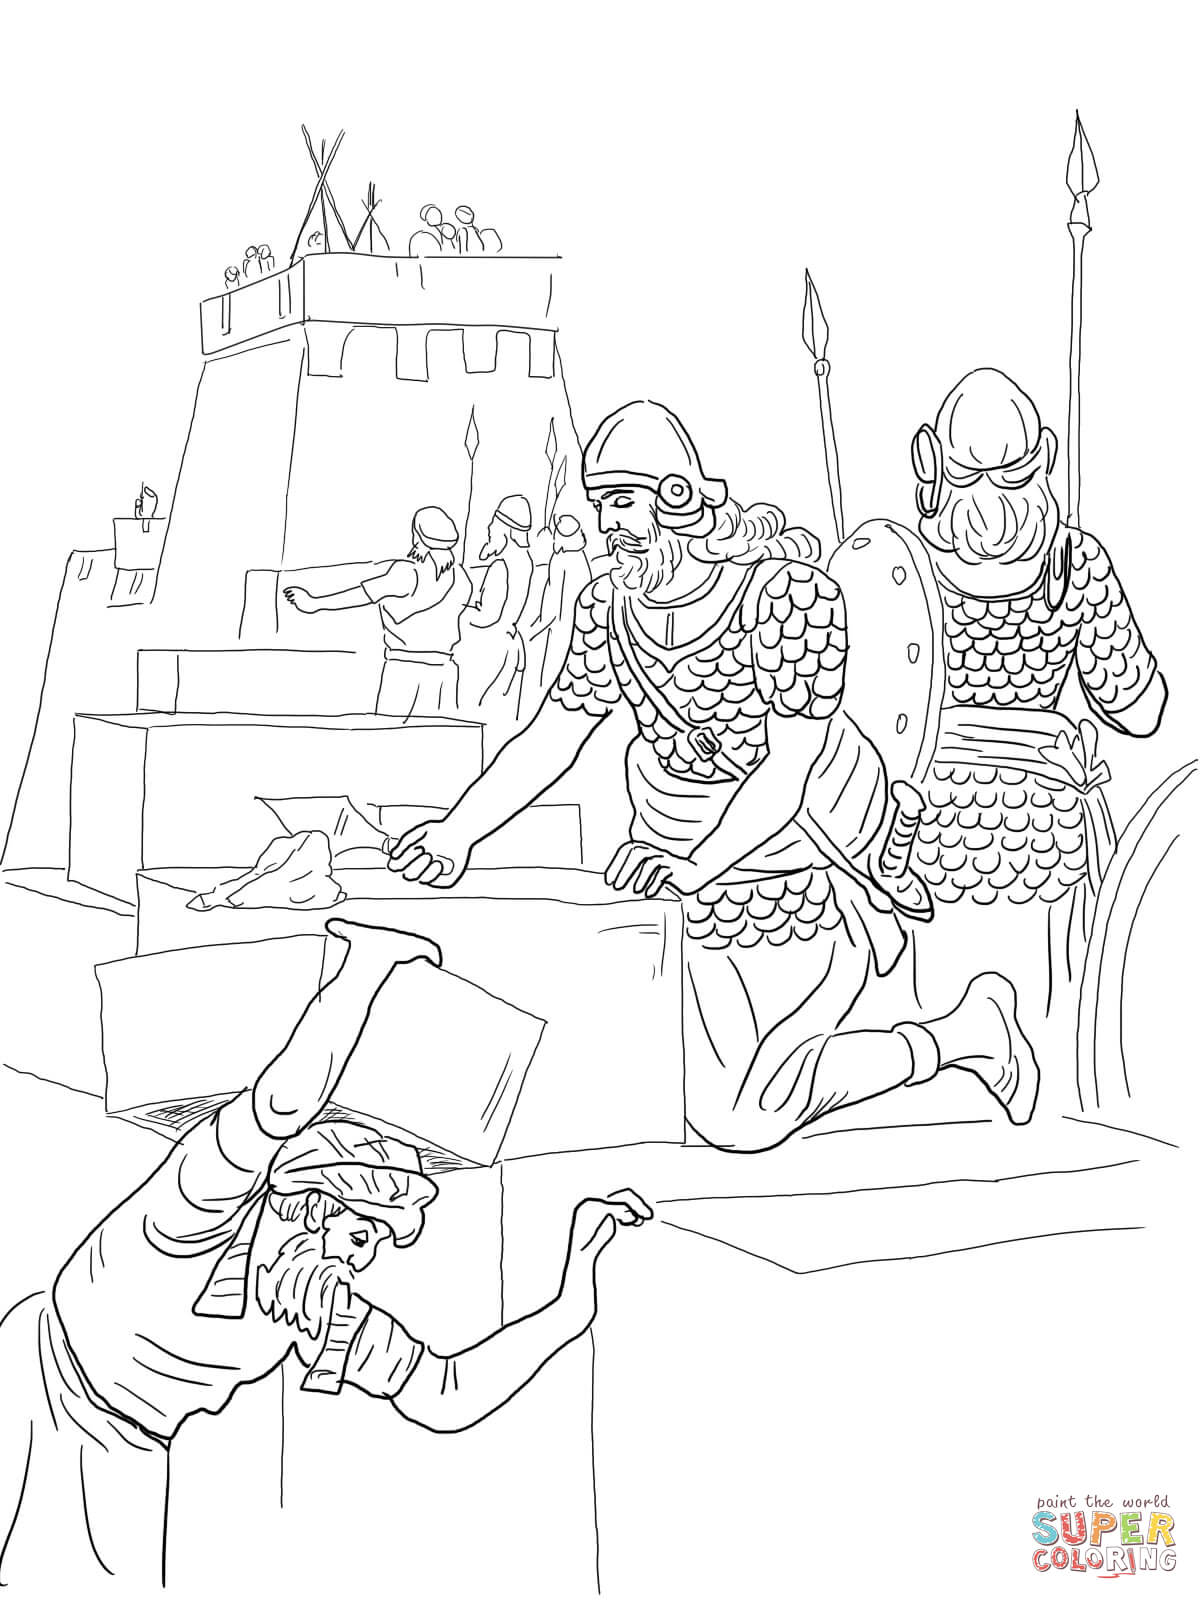 Nehemiah builds the walls and tower of jerusalem coloring page free printable coloring pages